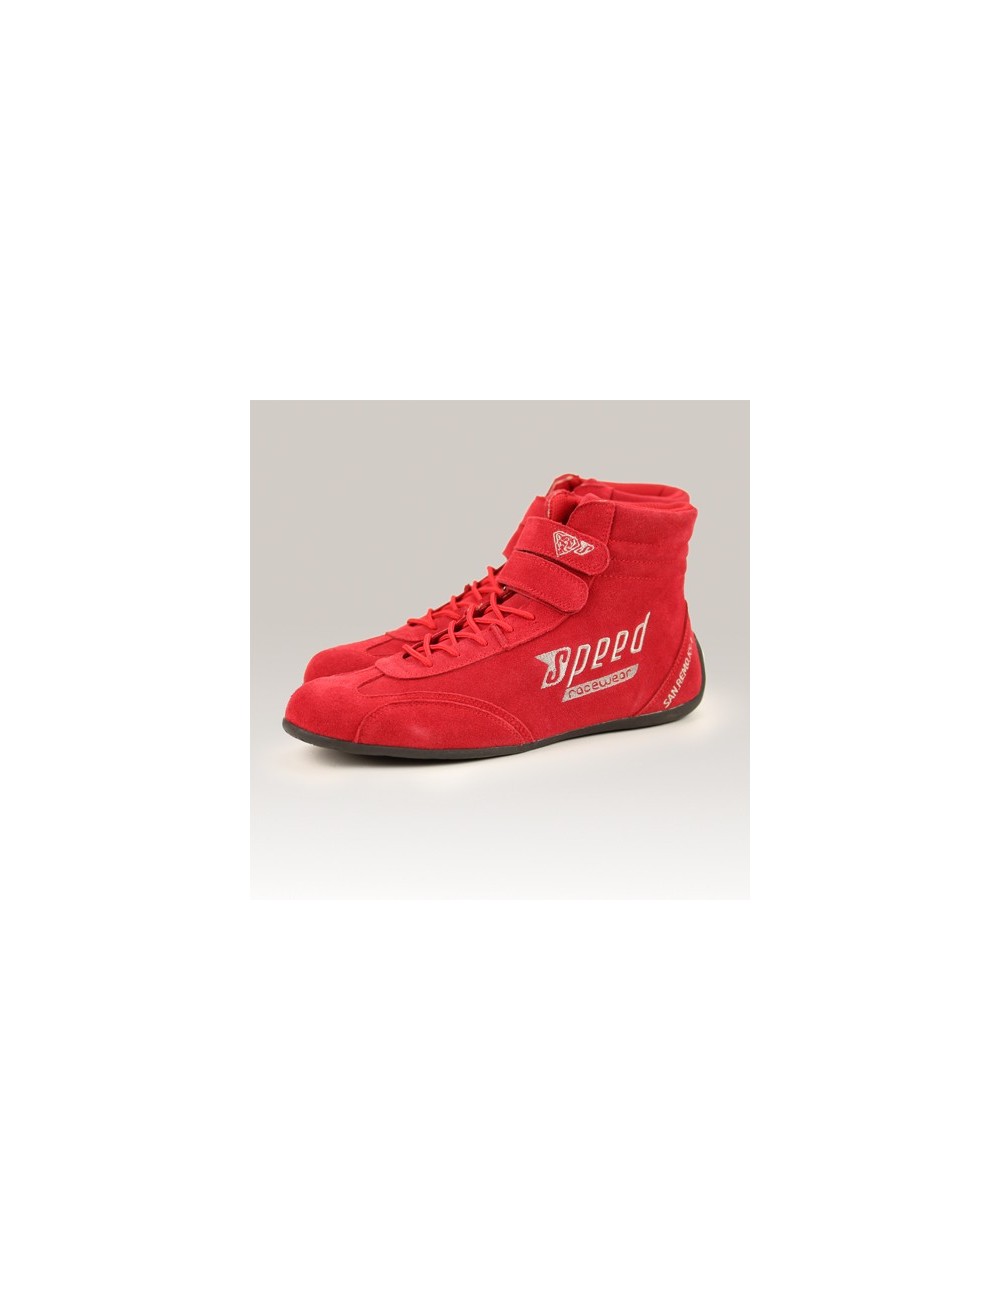 Speed chaussures San Remo KS-1 rouge